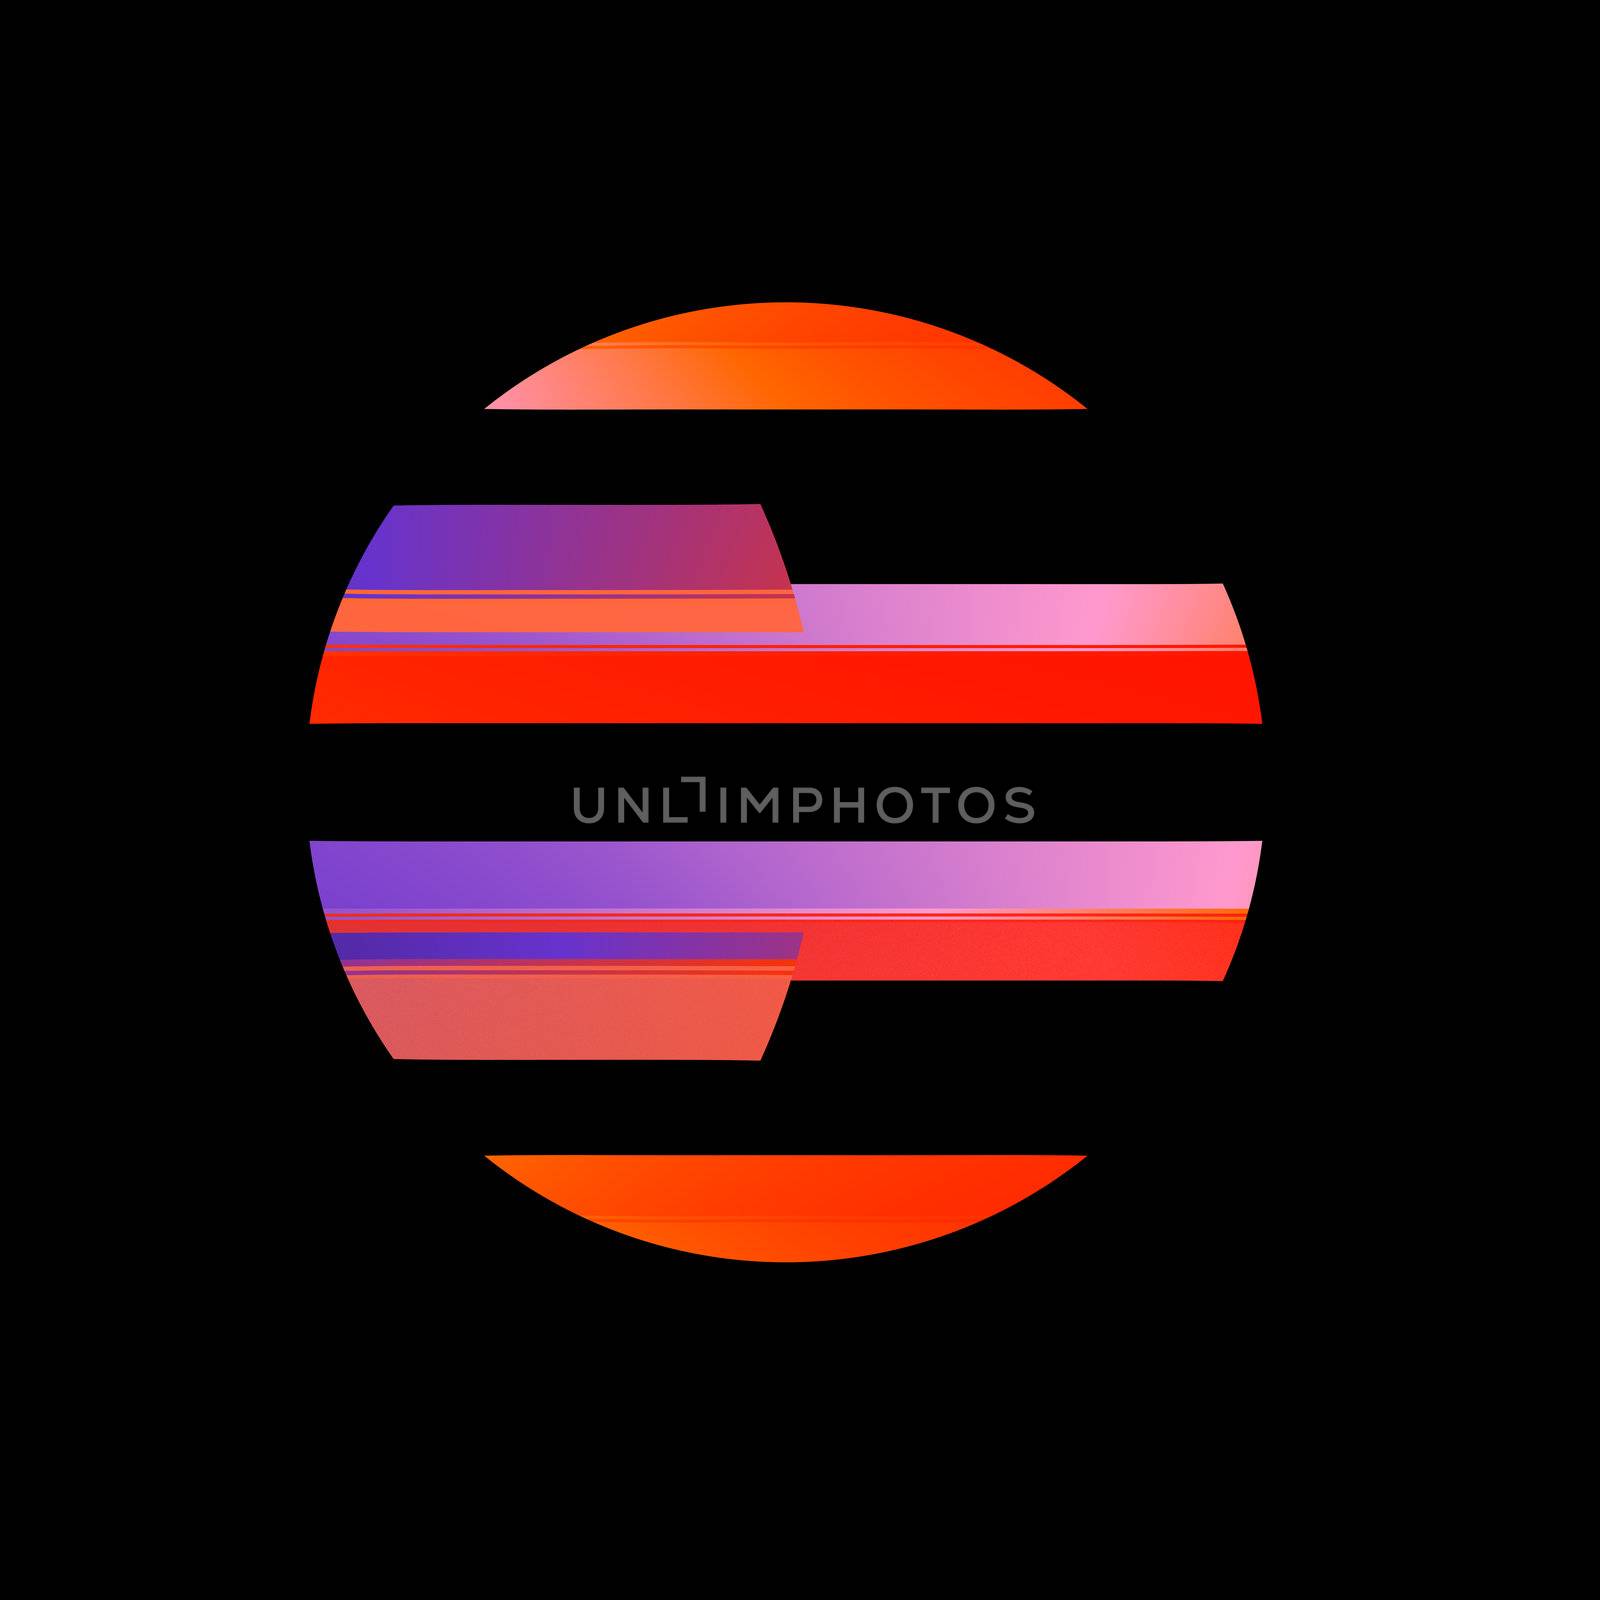 A circular abstract image done is shades of orange and purple. 